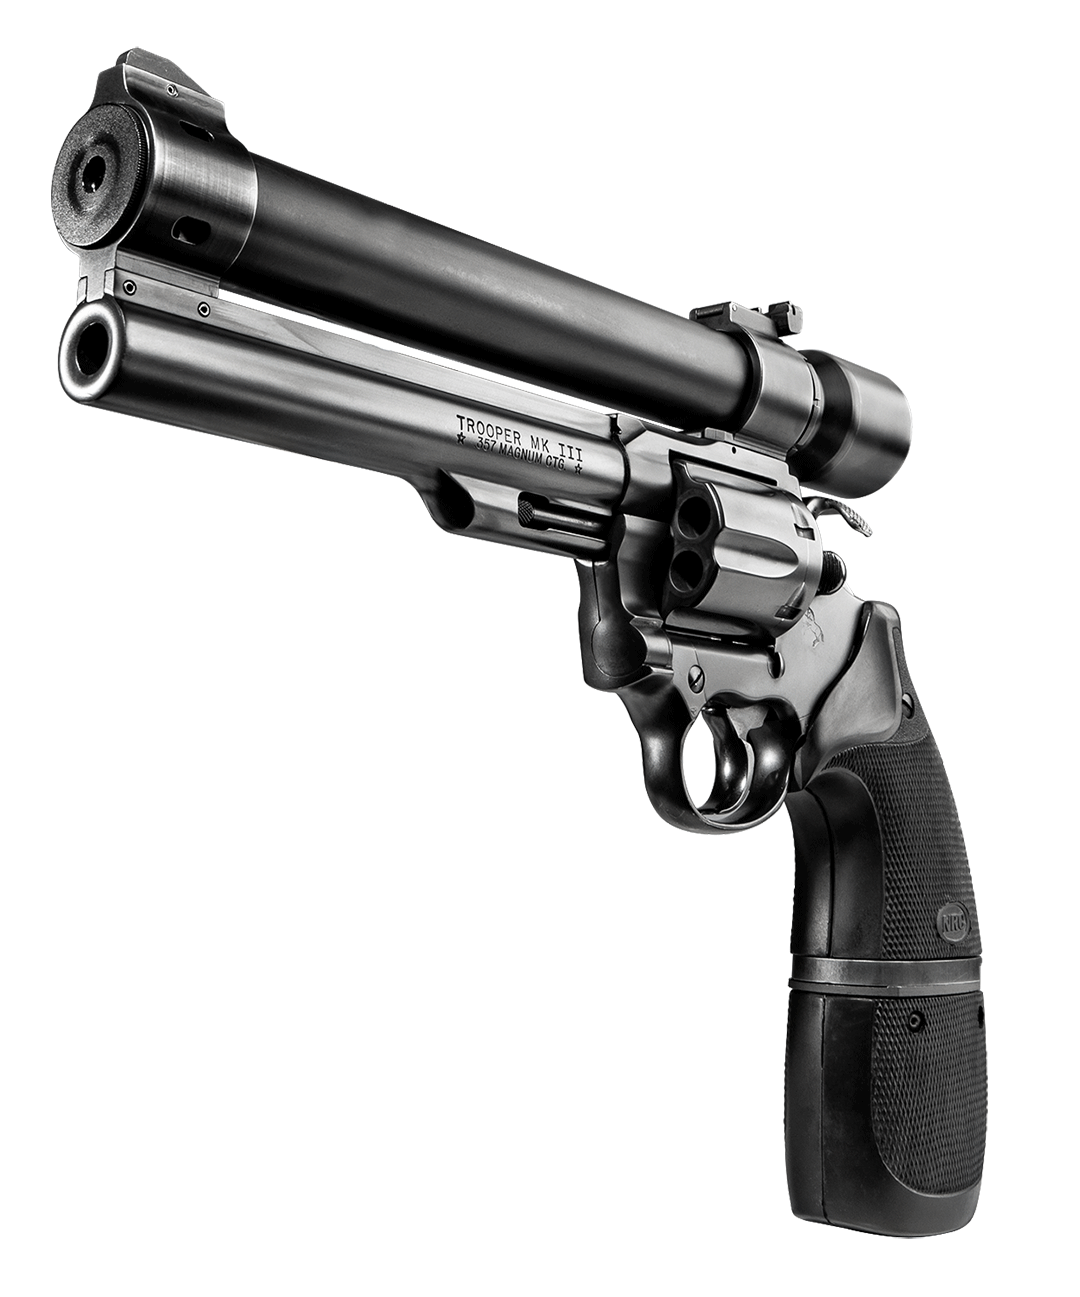 SureFire LPC Model 7, the first commercially available laser sight